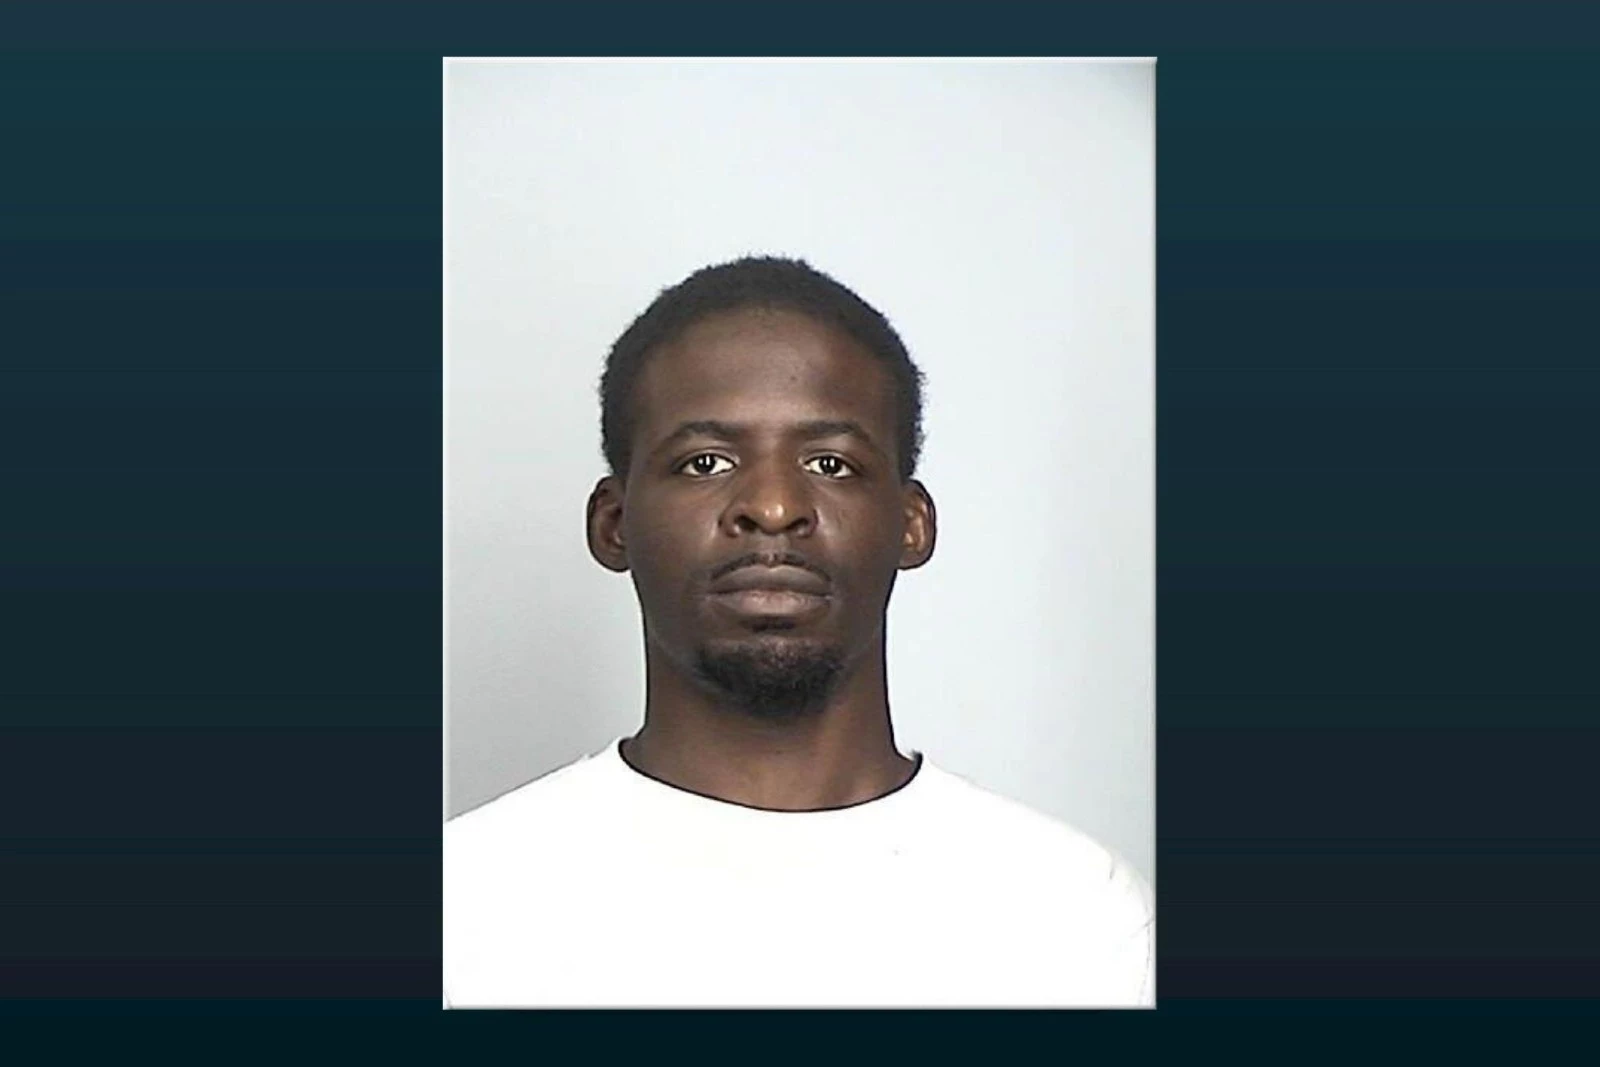 Minneapolis Man Sentenced to 17.5 Years for Armed Robbery